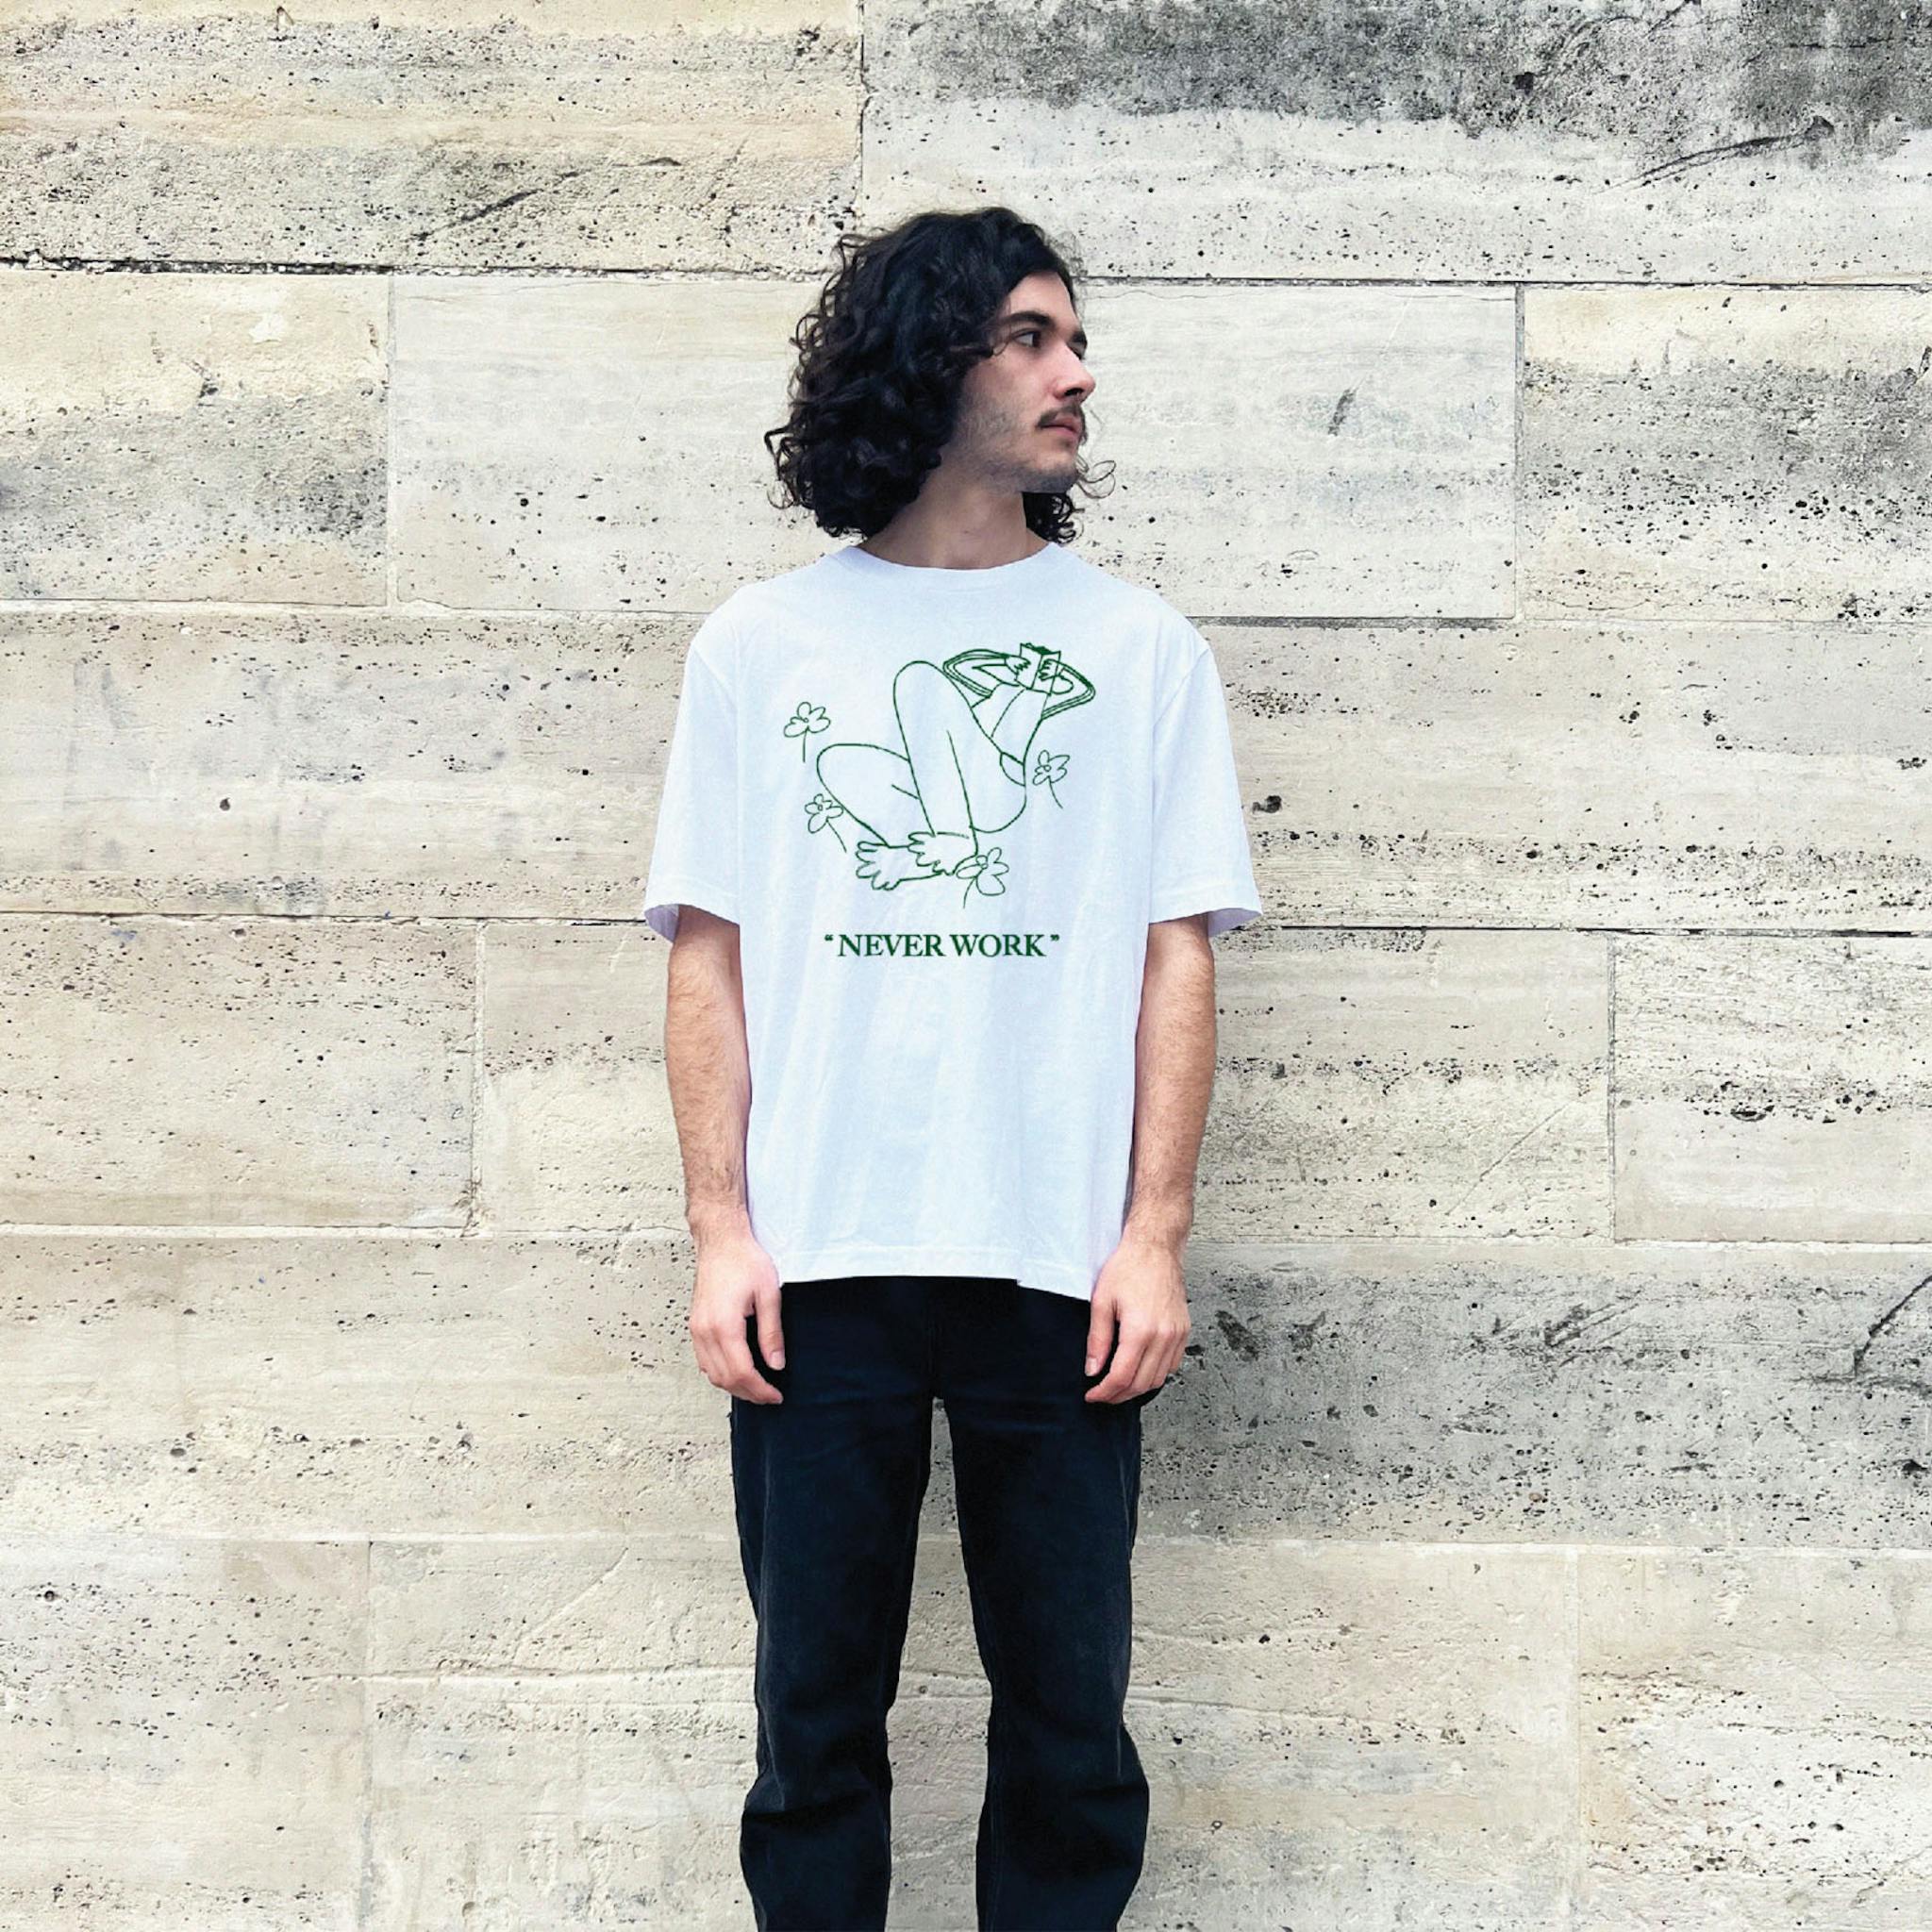 A man with long dark hair wearing a white T-shirt with a green outline drawing of a figure lying back with legs up, surrounded by flowers, and the phrase "NEVER WORK" below it.